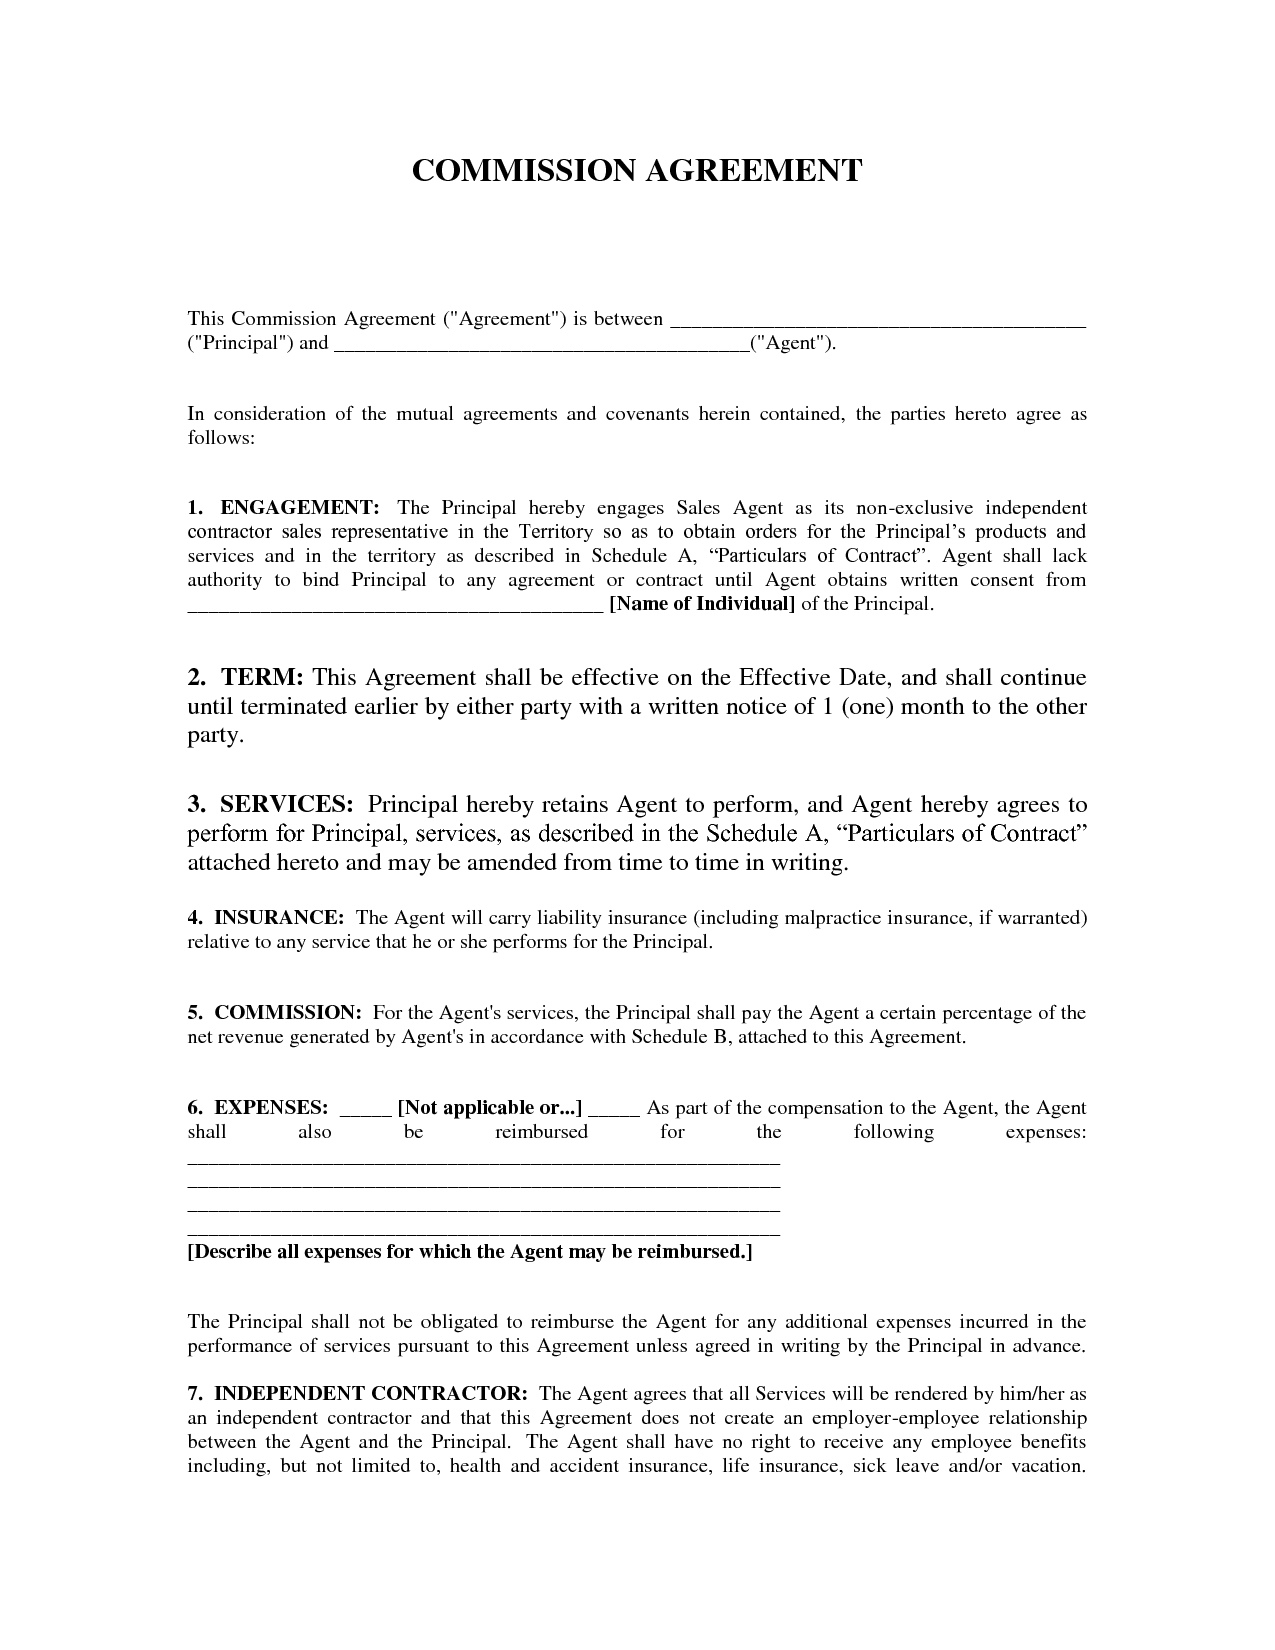 Simple Sales Agreement Template Commission Sales Agreement Template Free Expert 7 Best Of Sales